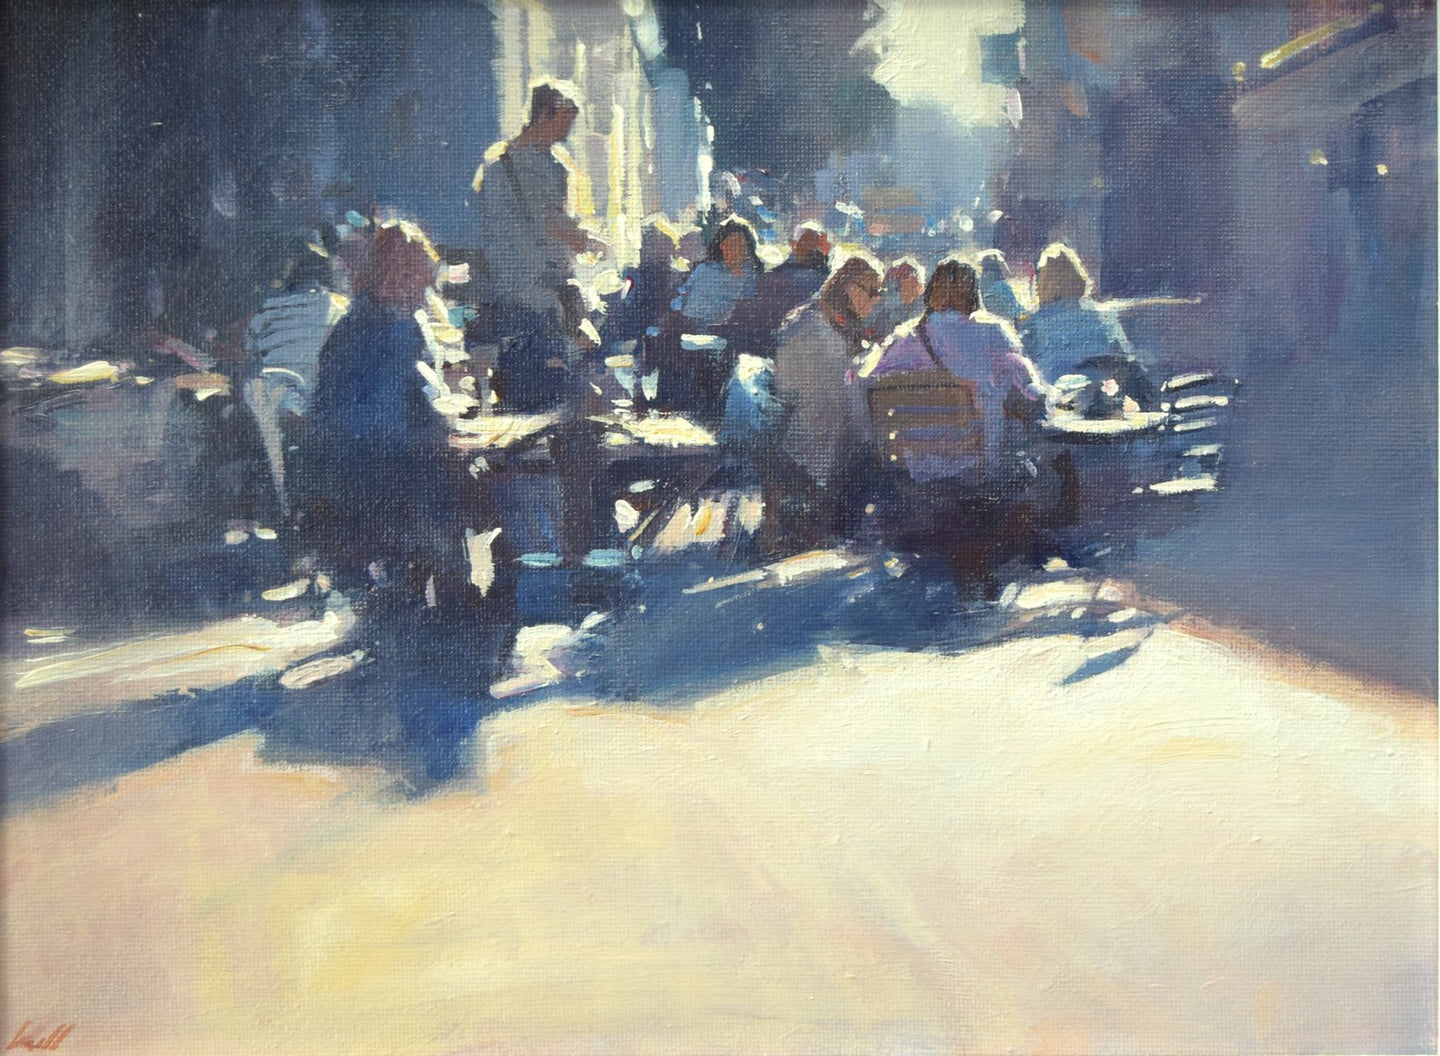 9 x 12 inch acrylic painting by Carl Knibb, depicting lots of people outside a street cafe, sitting on tables, enjoying a chat over lunch, again looking into the sunlight, with strong, blue shadows cast on the pavement around them.